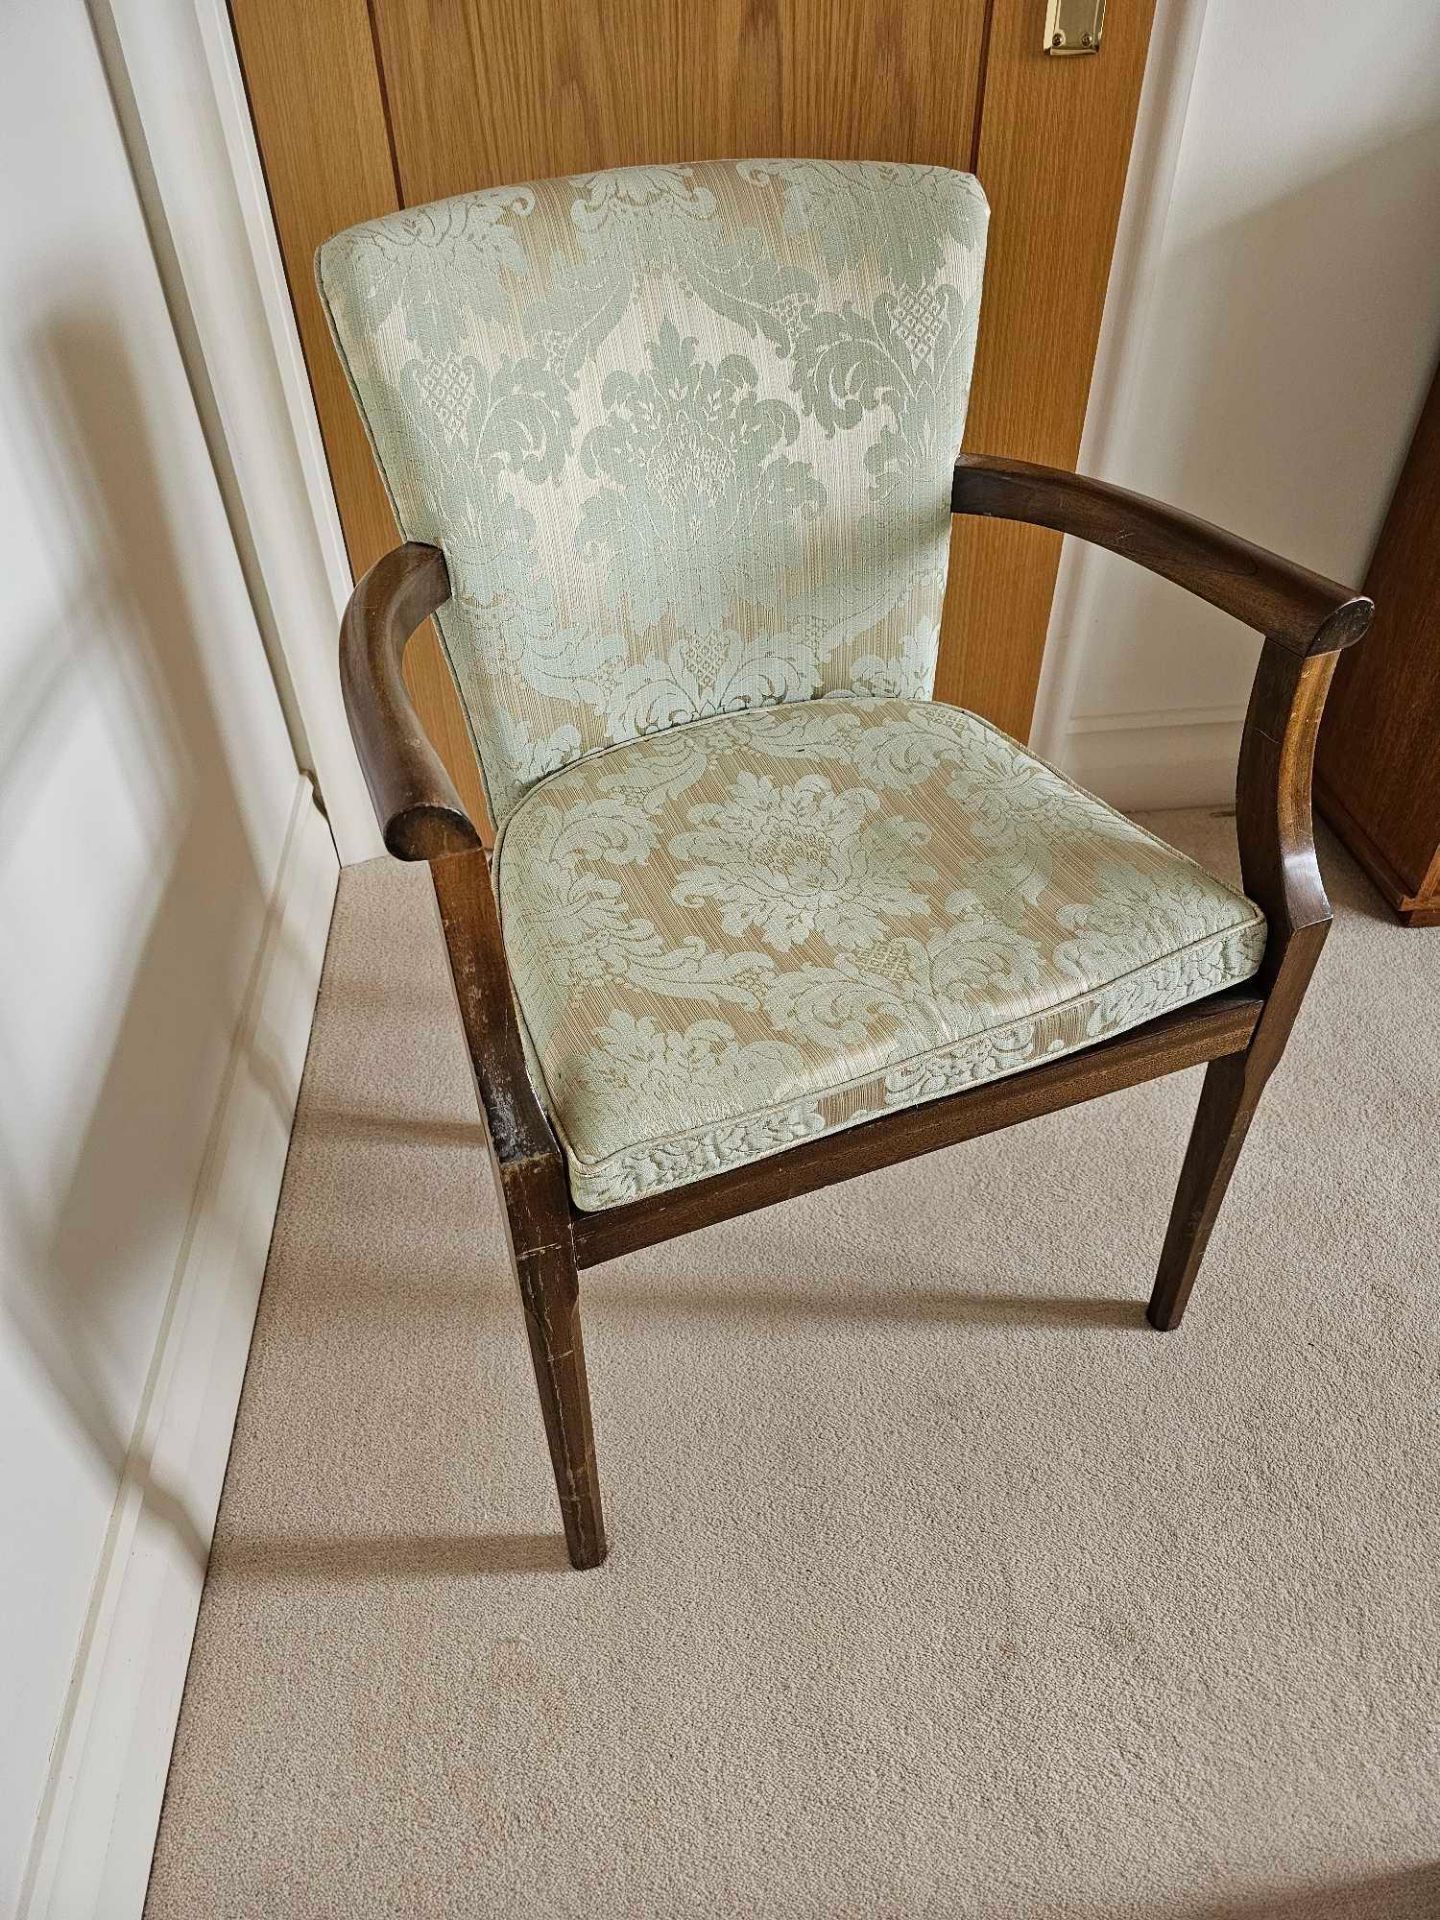 A Parker Knoll Style Armchair Upholstered In A Damask Fabric With Later Replacement Strap Banding To - Image 2 of 5